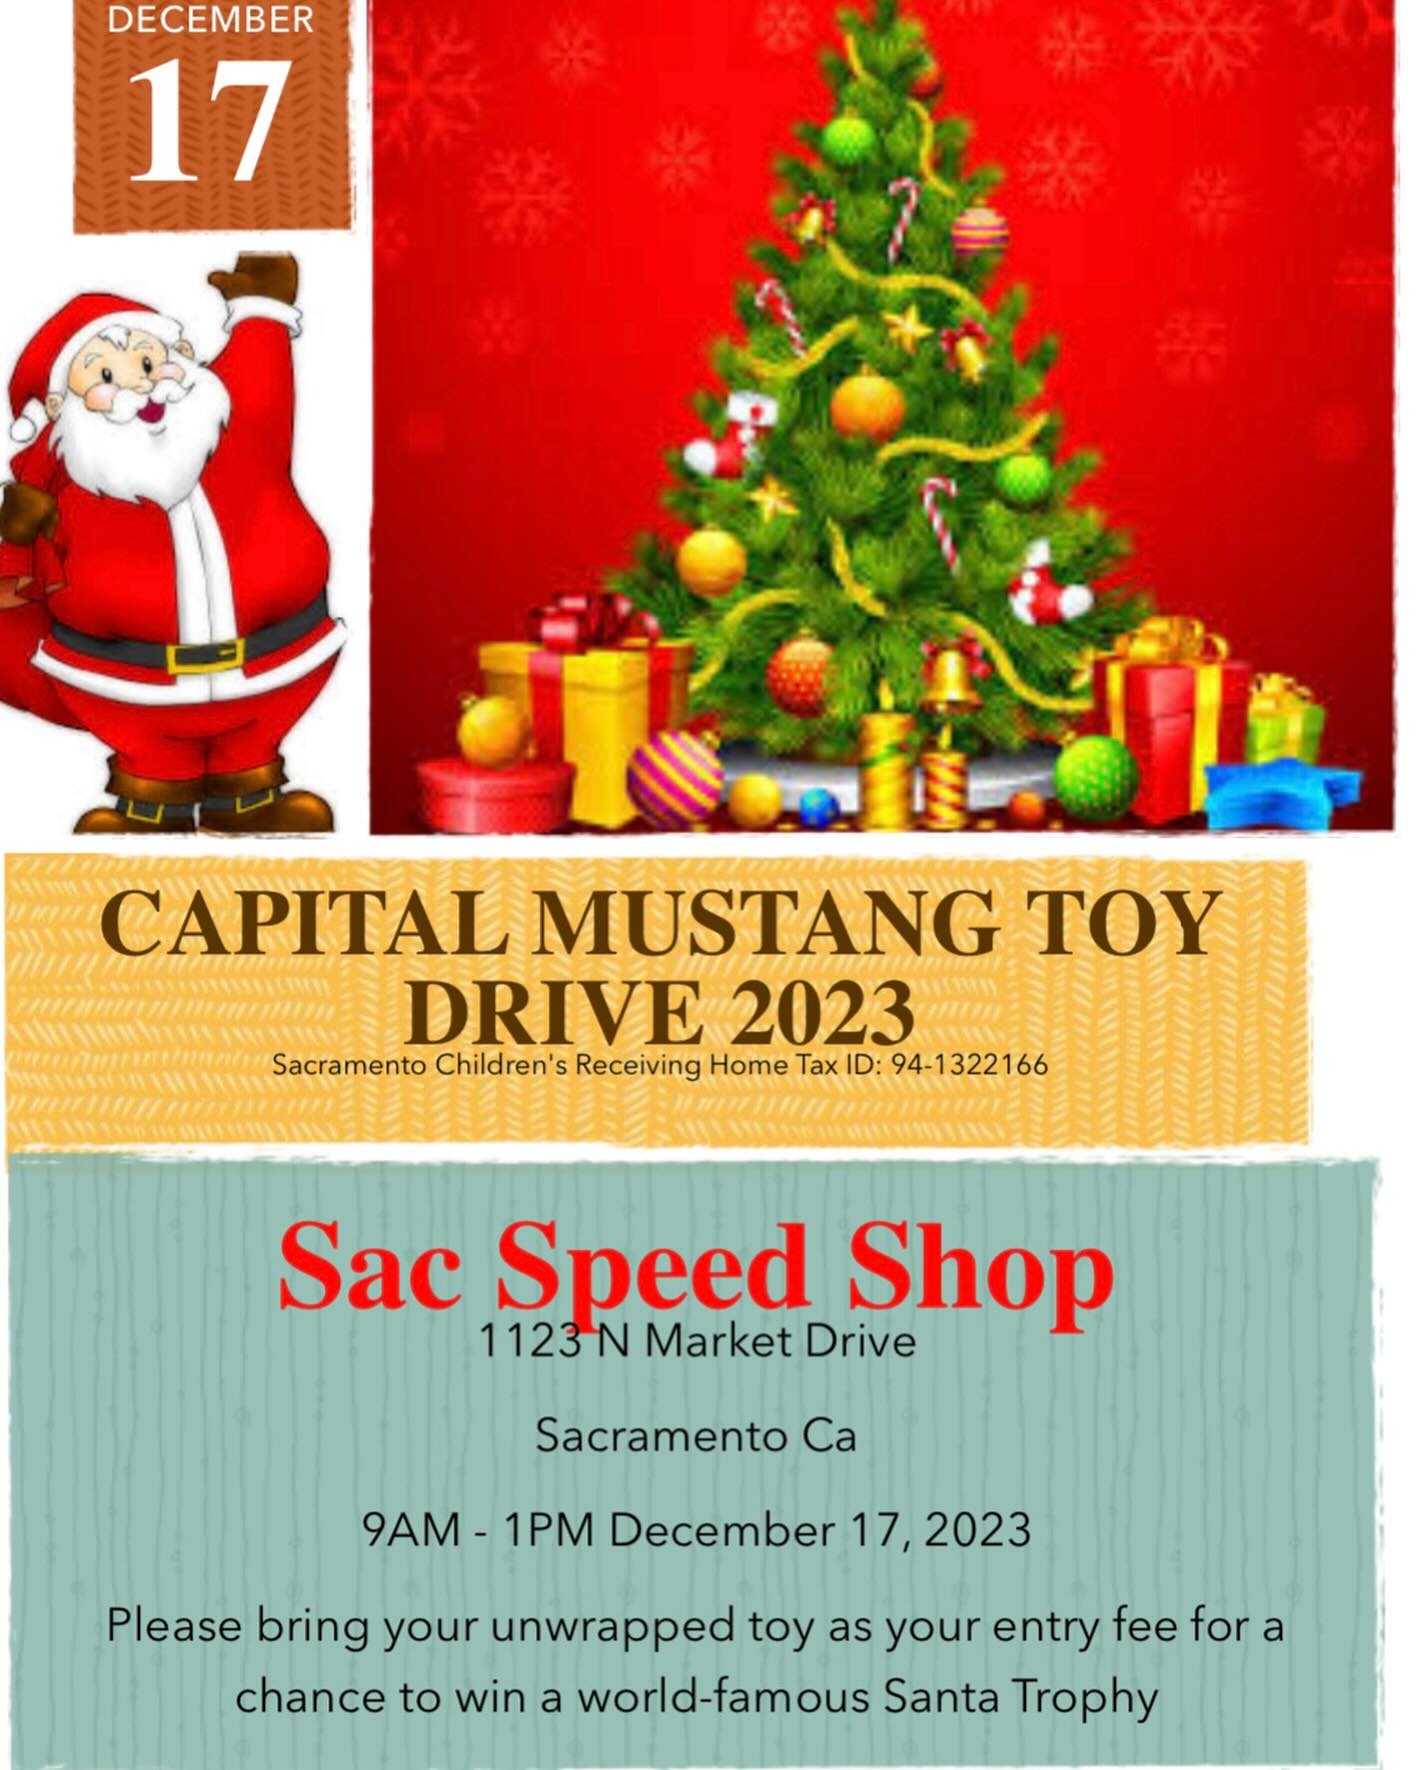 Capital Mustang Toy Drive 2023